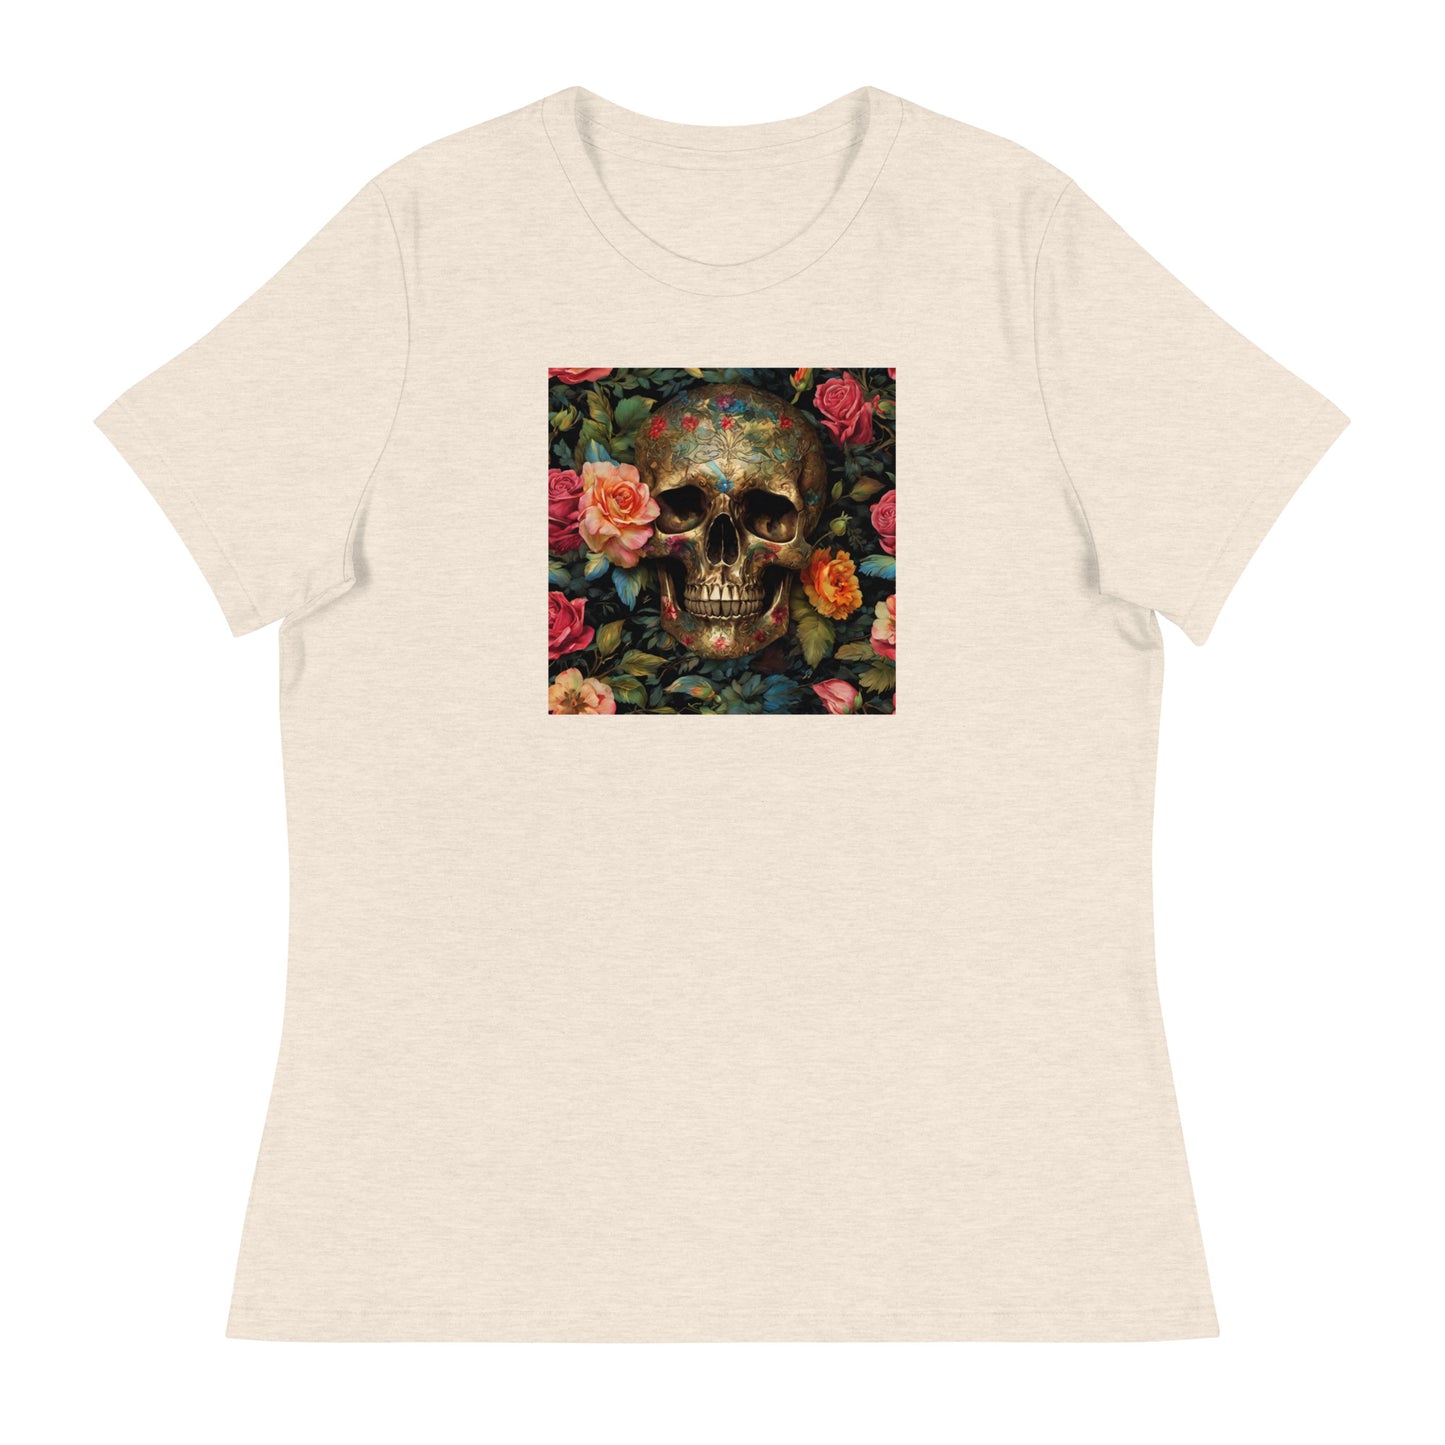 Skull and Roses Graphic Women's T-Shirt Heather Prism Natural